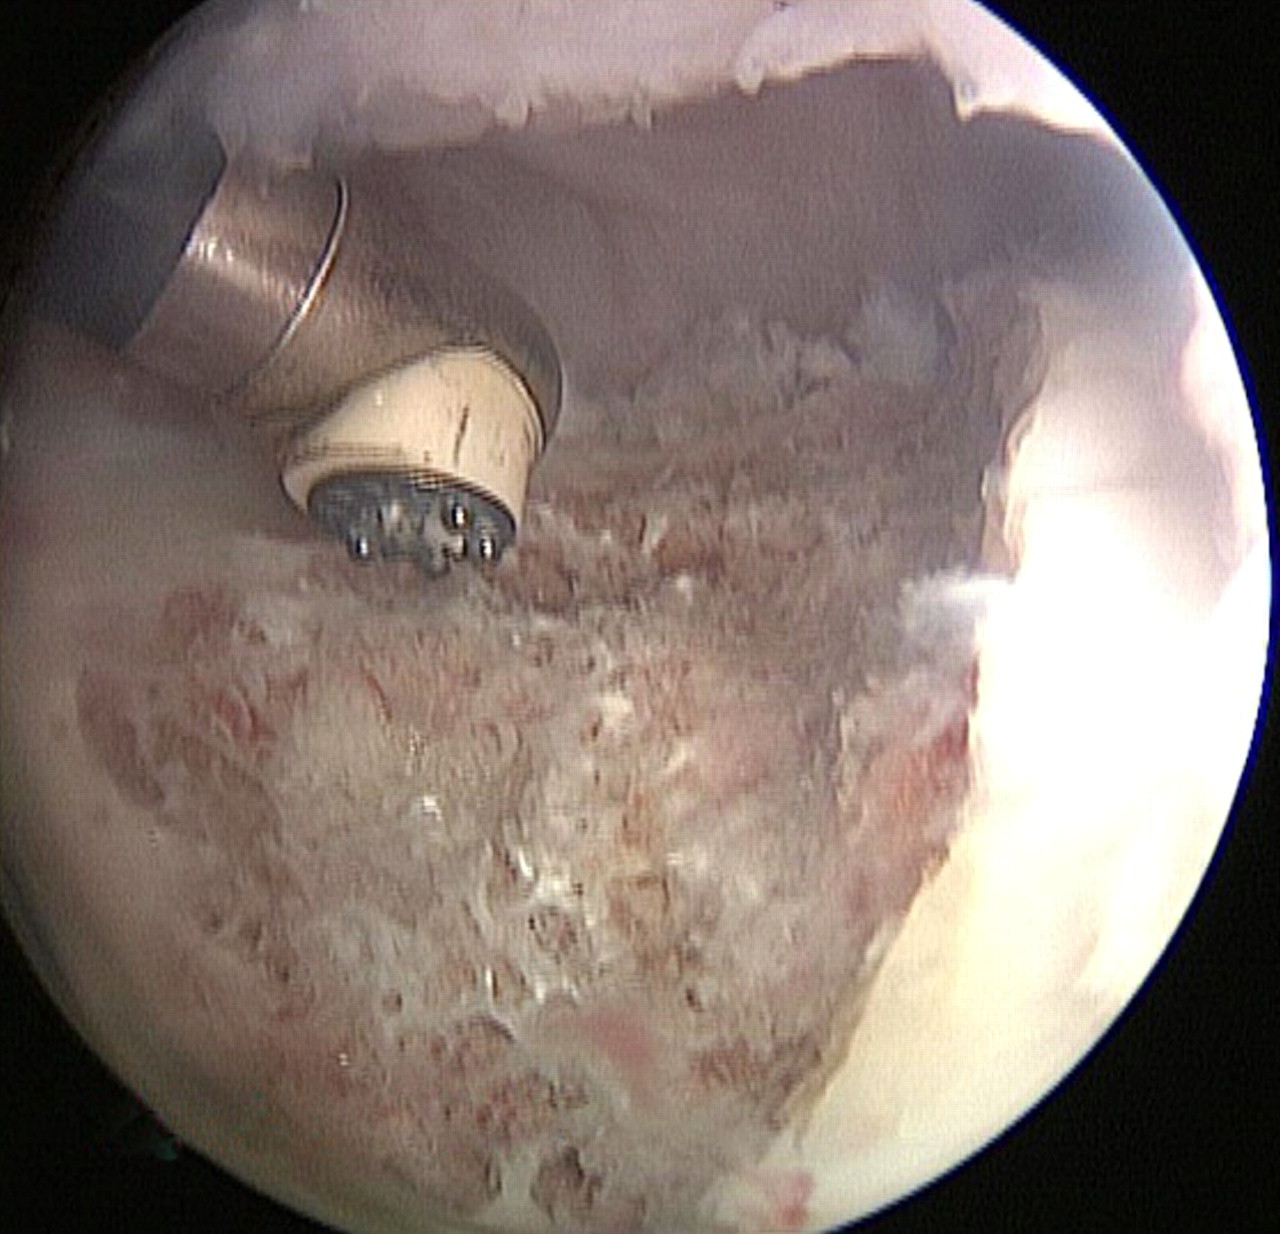 Figs. 6a - 6b 
            Arthroscopic images of the peripheral
compartment of a left hip, a) after femoral osteochondroplasty,
showing the exposed bleeding surface of raw cancellous bone, and
b) after treatment with the radiofrequency ablation probe for haemostasis.
          